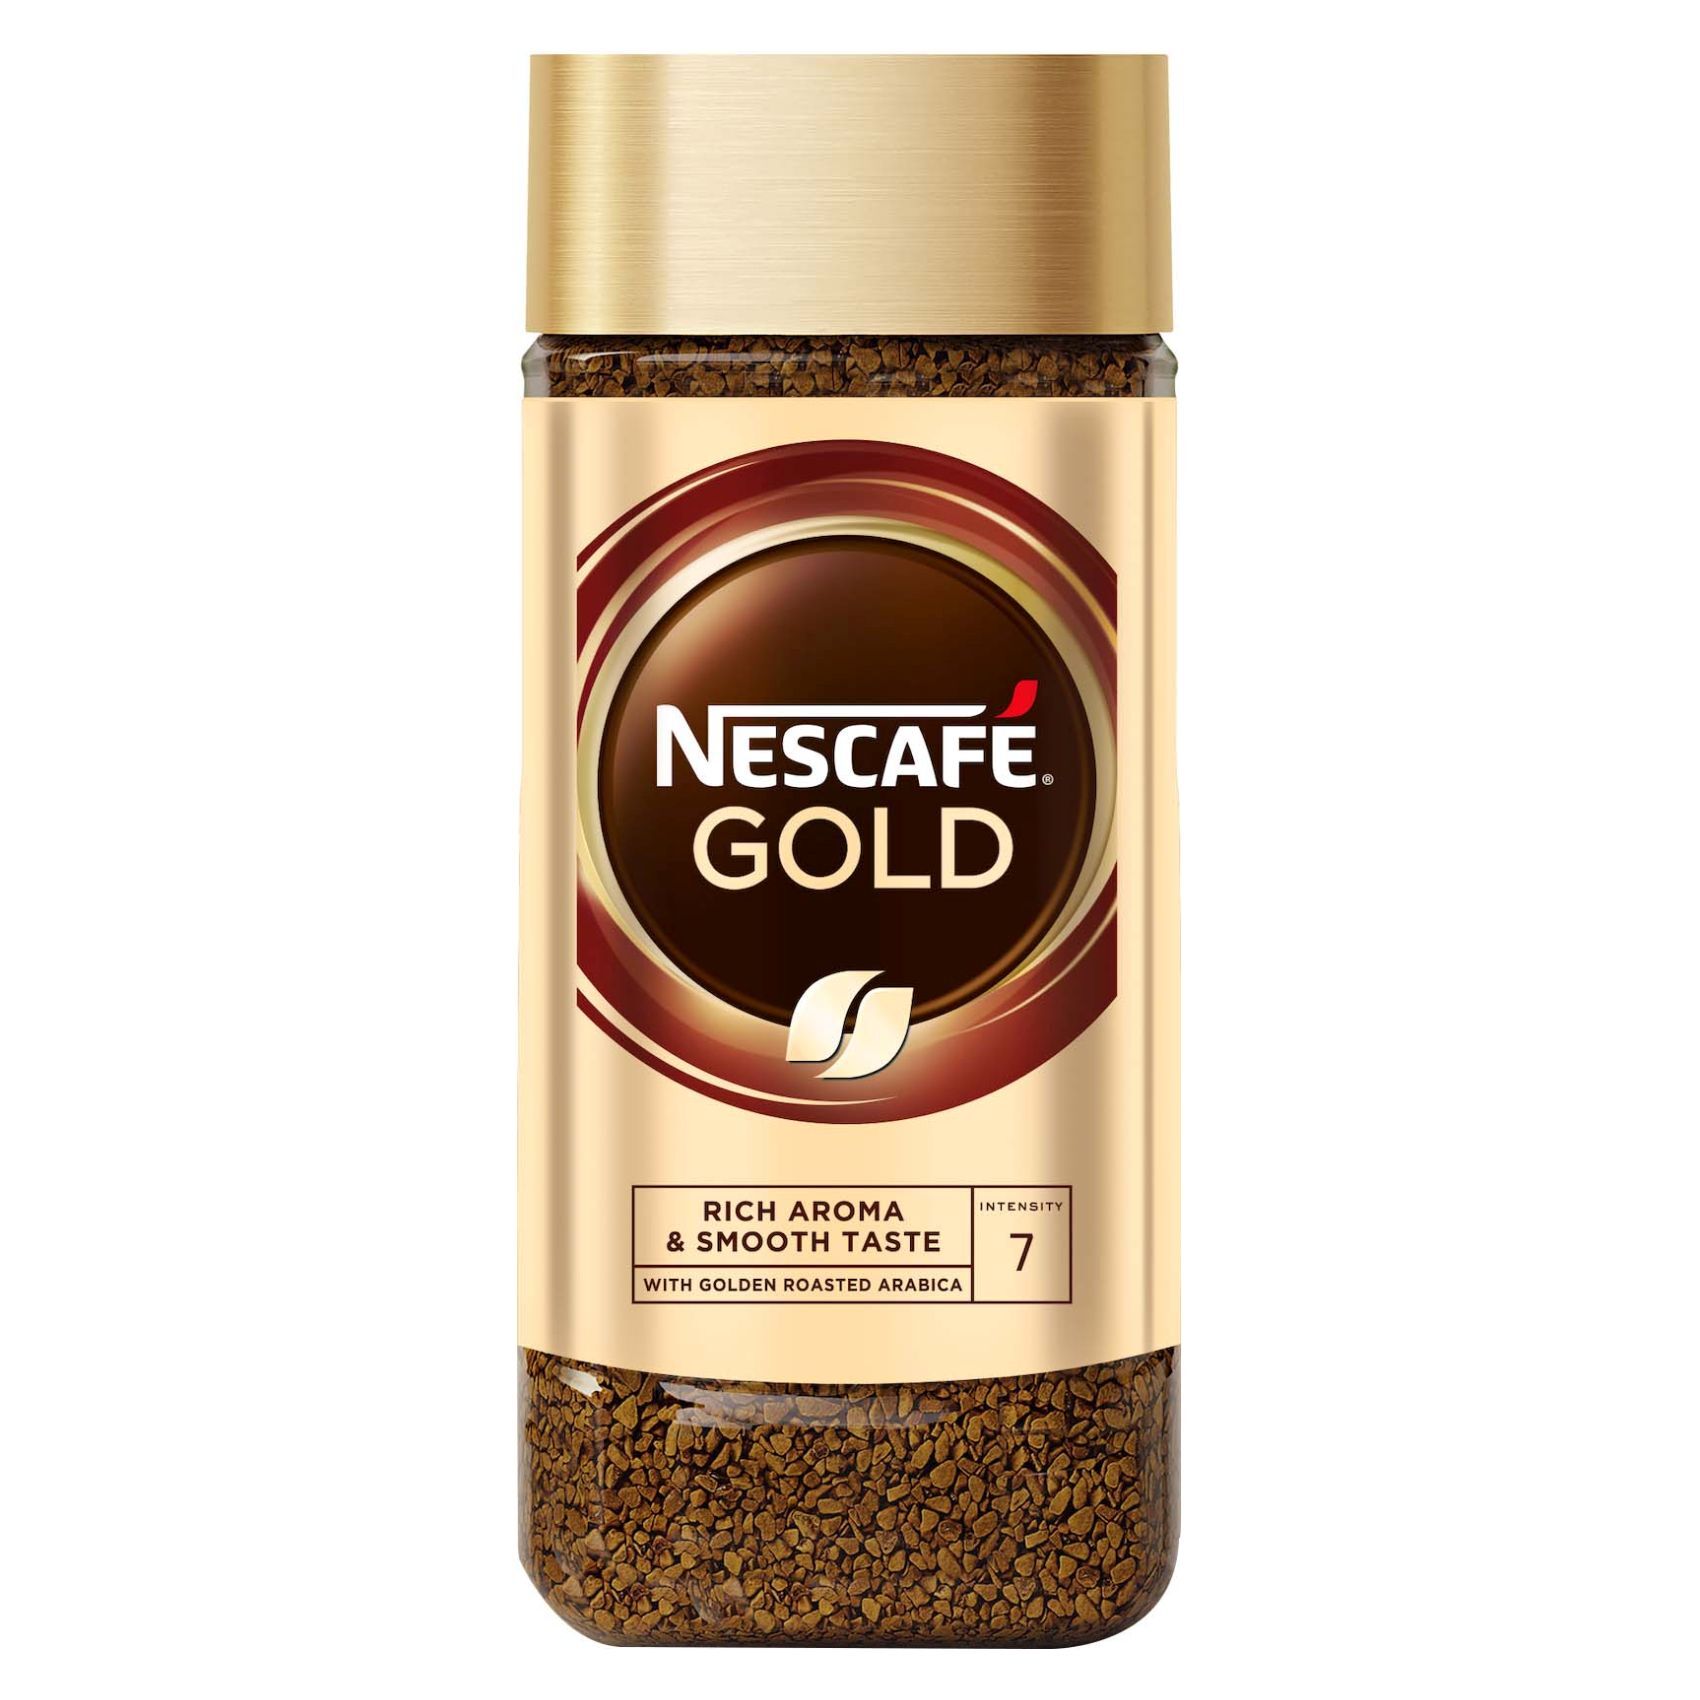 Nescafe Gold 3in1 Original with Golden Roasted Arabica